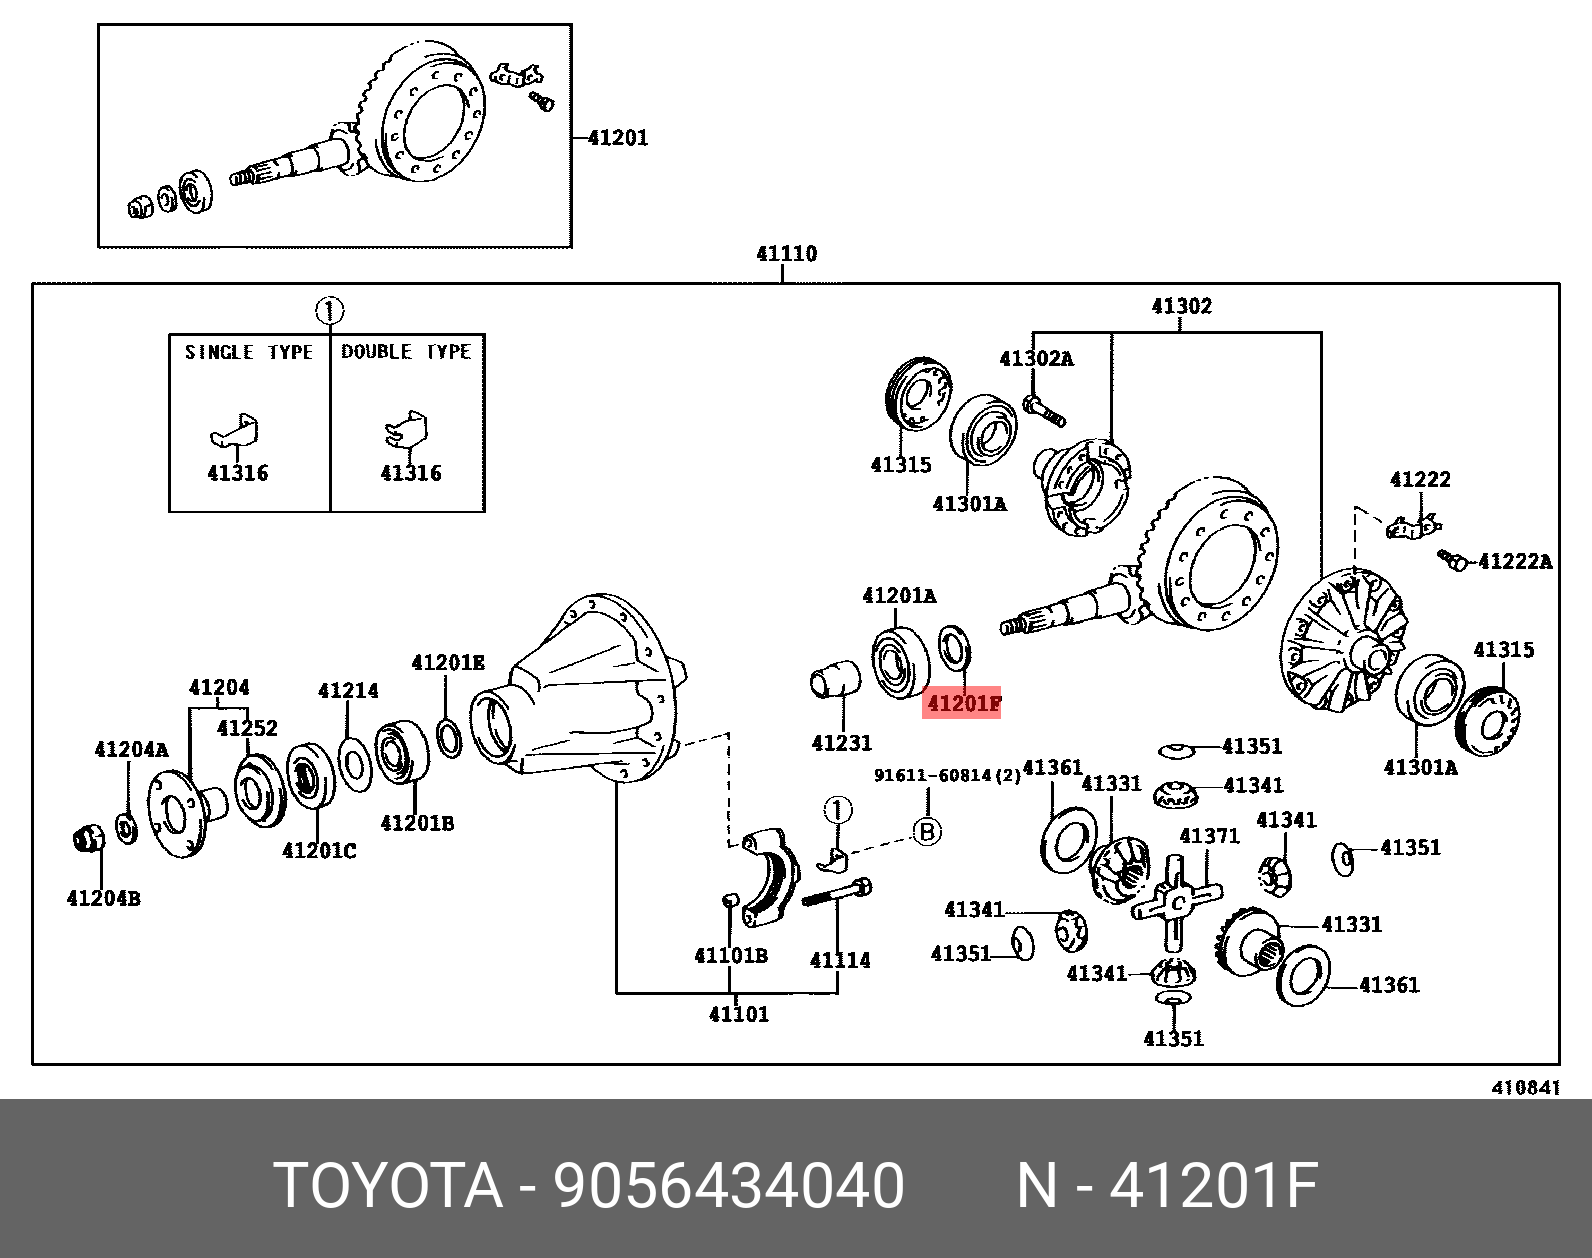 9056434040, HARRIER 199712-200302, ACU1#, MCU1#, SXU1#, WASHER, PLATE (FOR REAR DIFFERENTIAL DRIVE PINION)